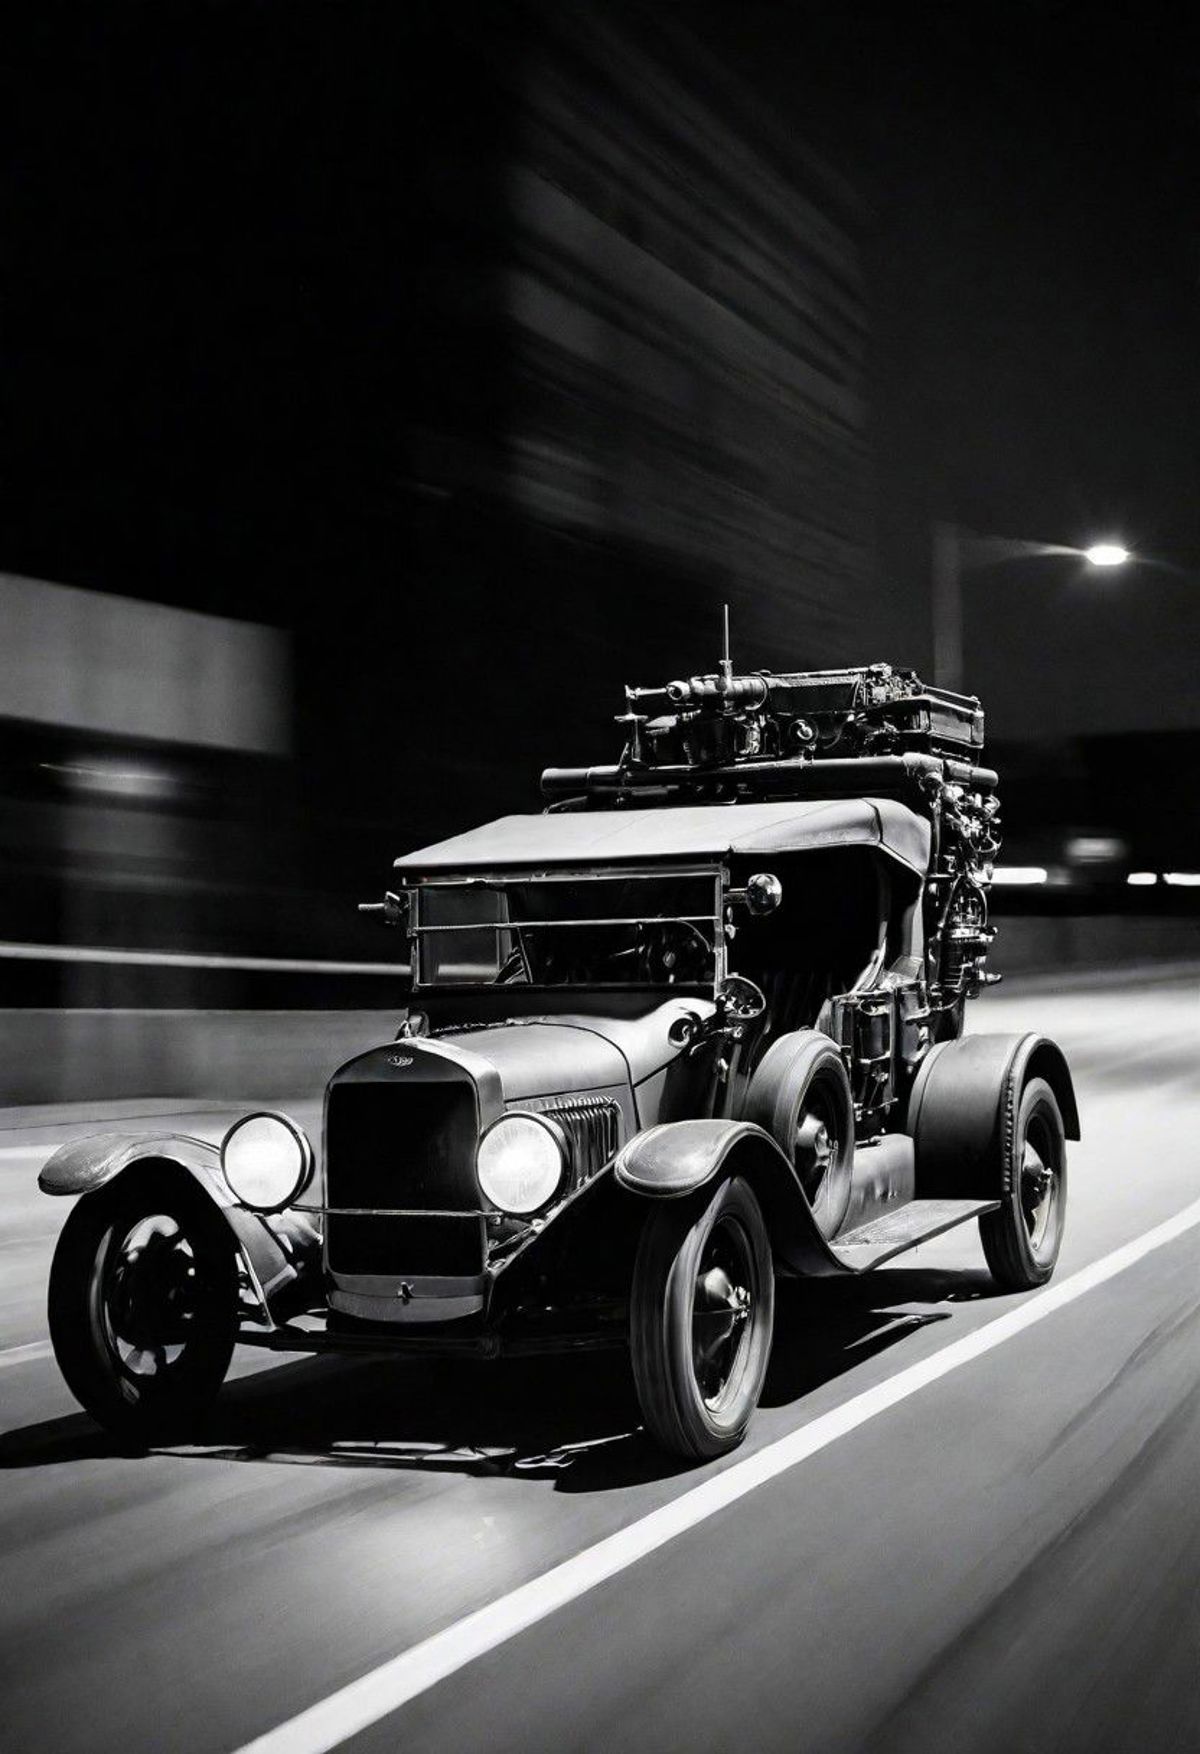 A Vintage Car with a Luggage Rack on the Roof, Driving on a Road at Night.